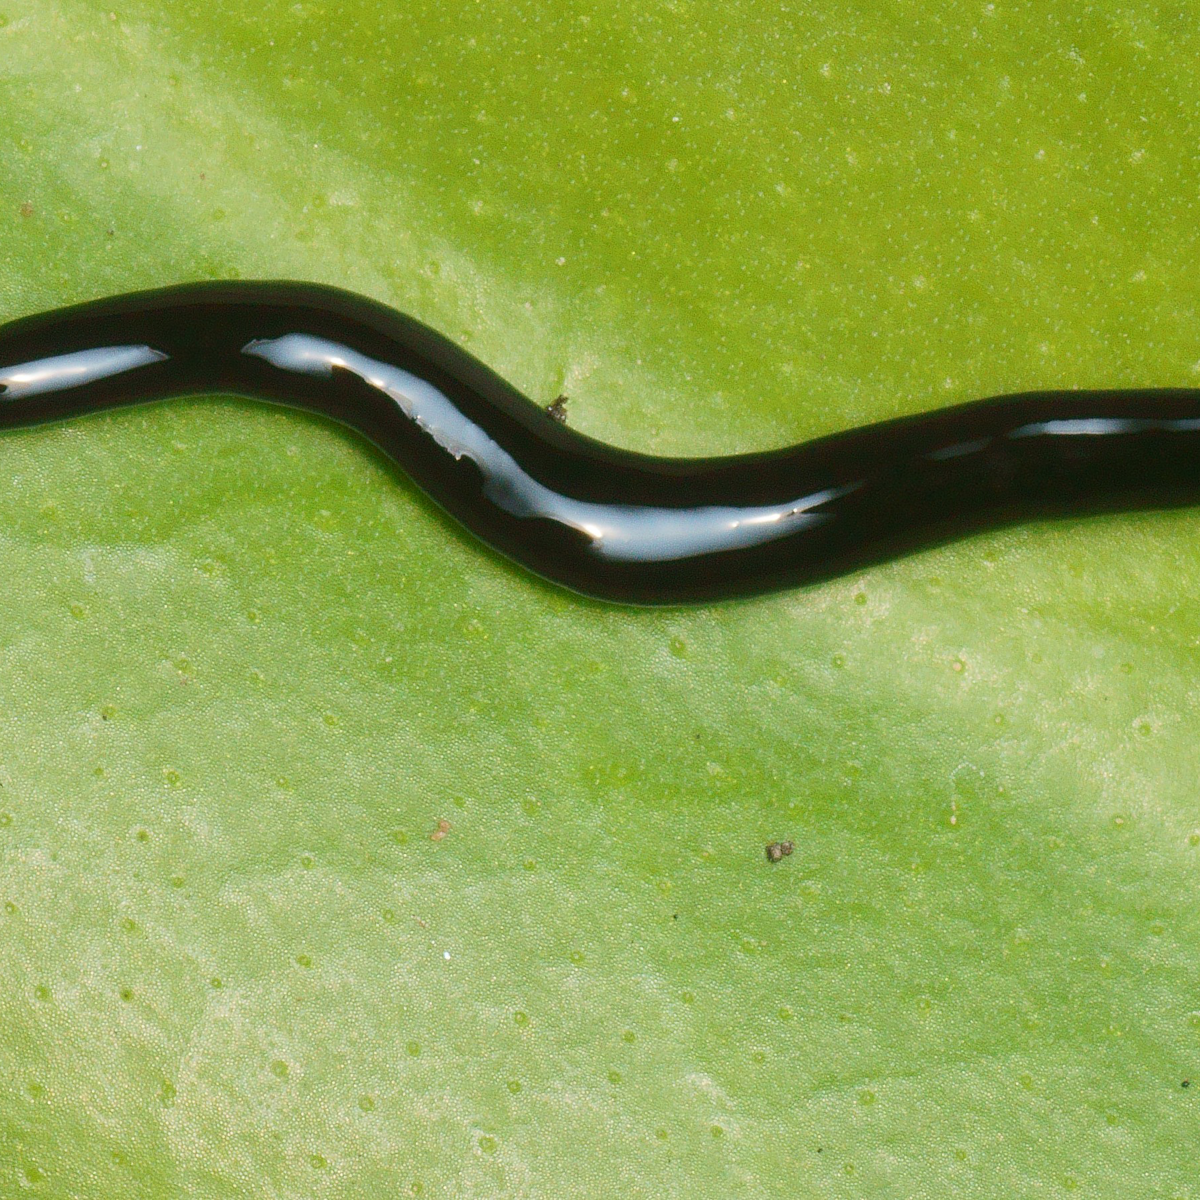 A new species of flatworm in our gardens that comes from Asia: Humbertium  covidum